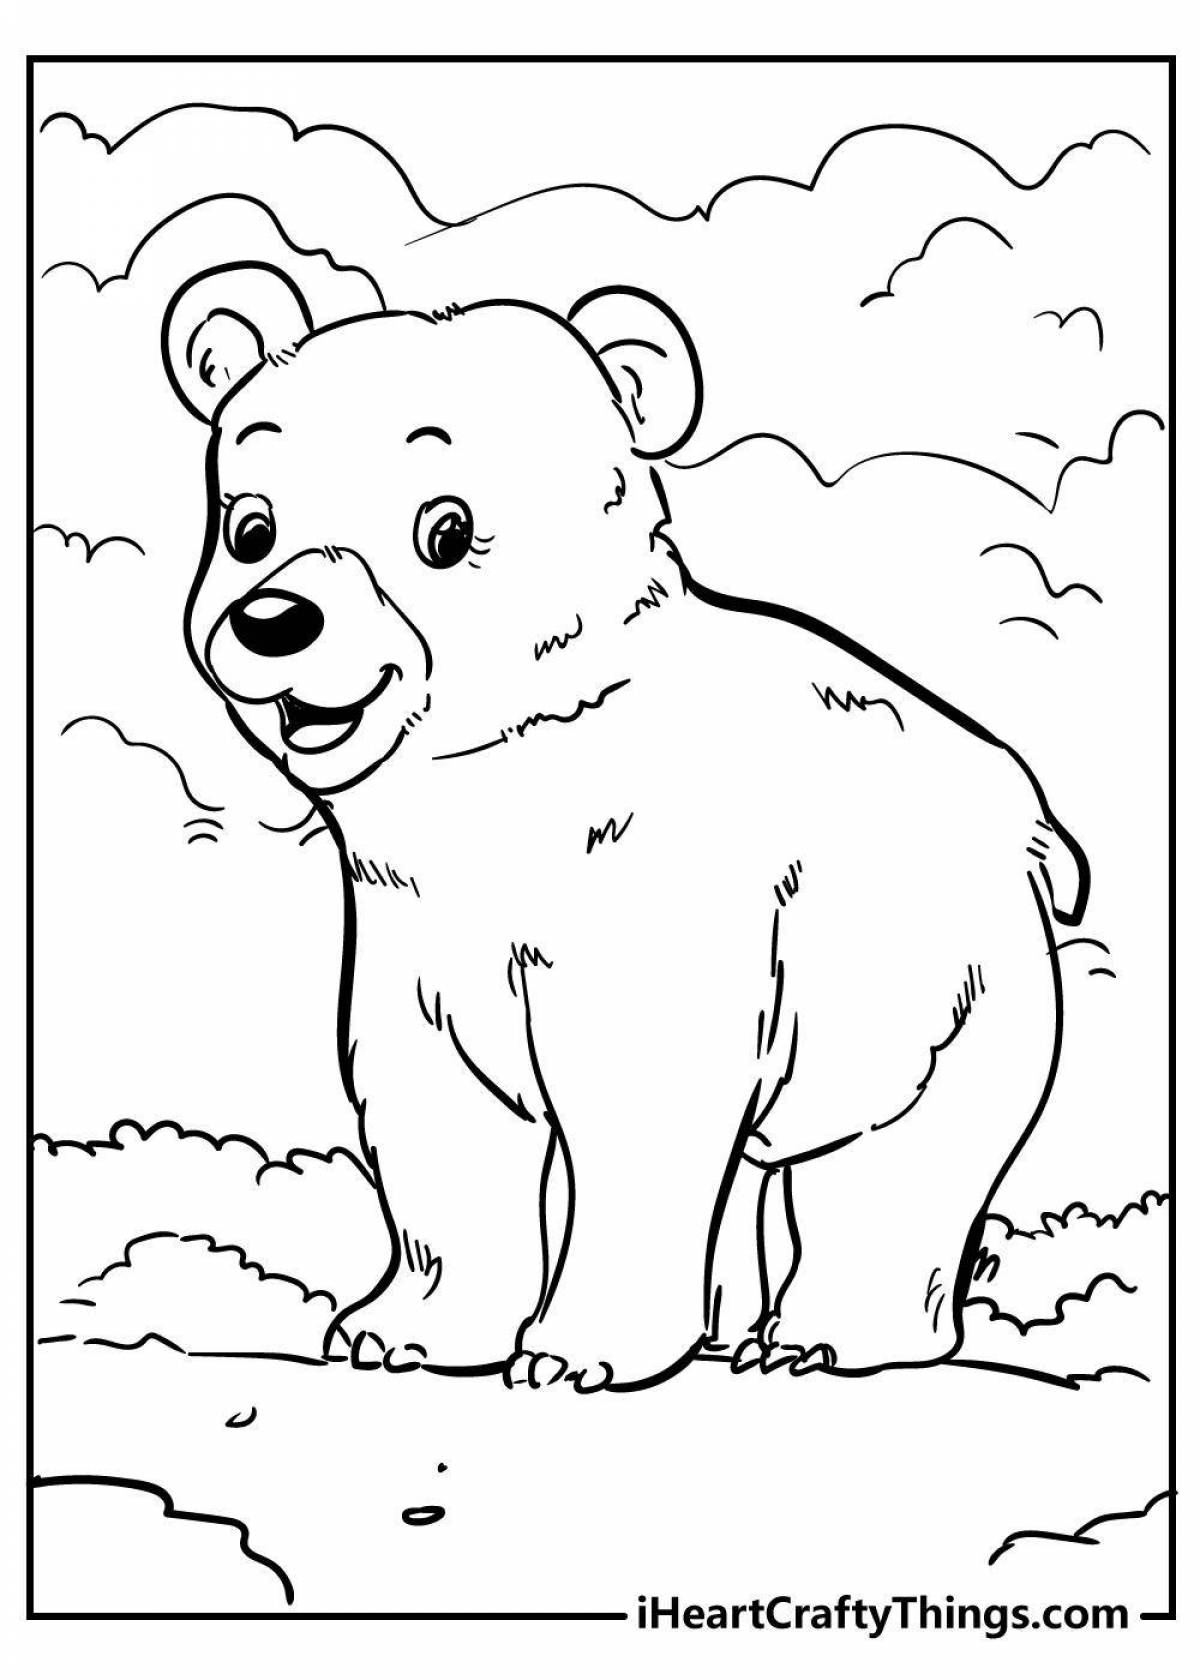 Bright coloring bear for children 5-6 years old